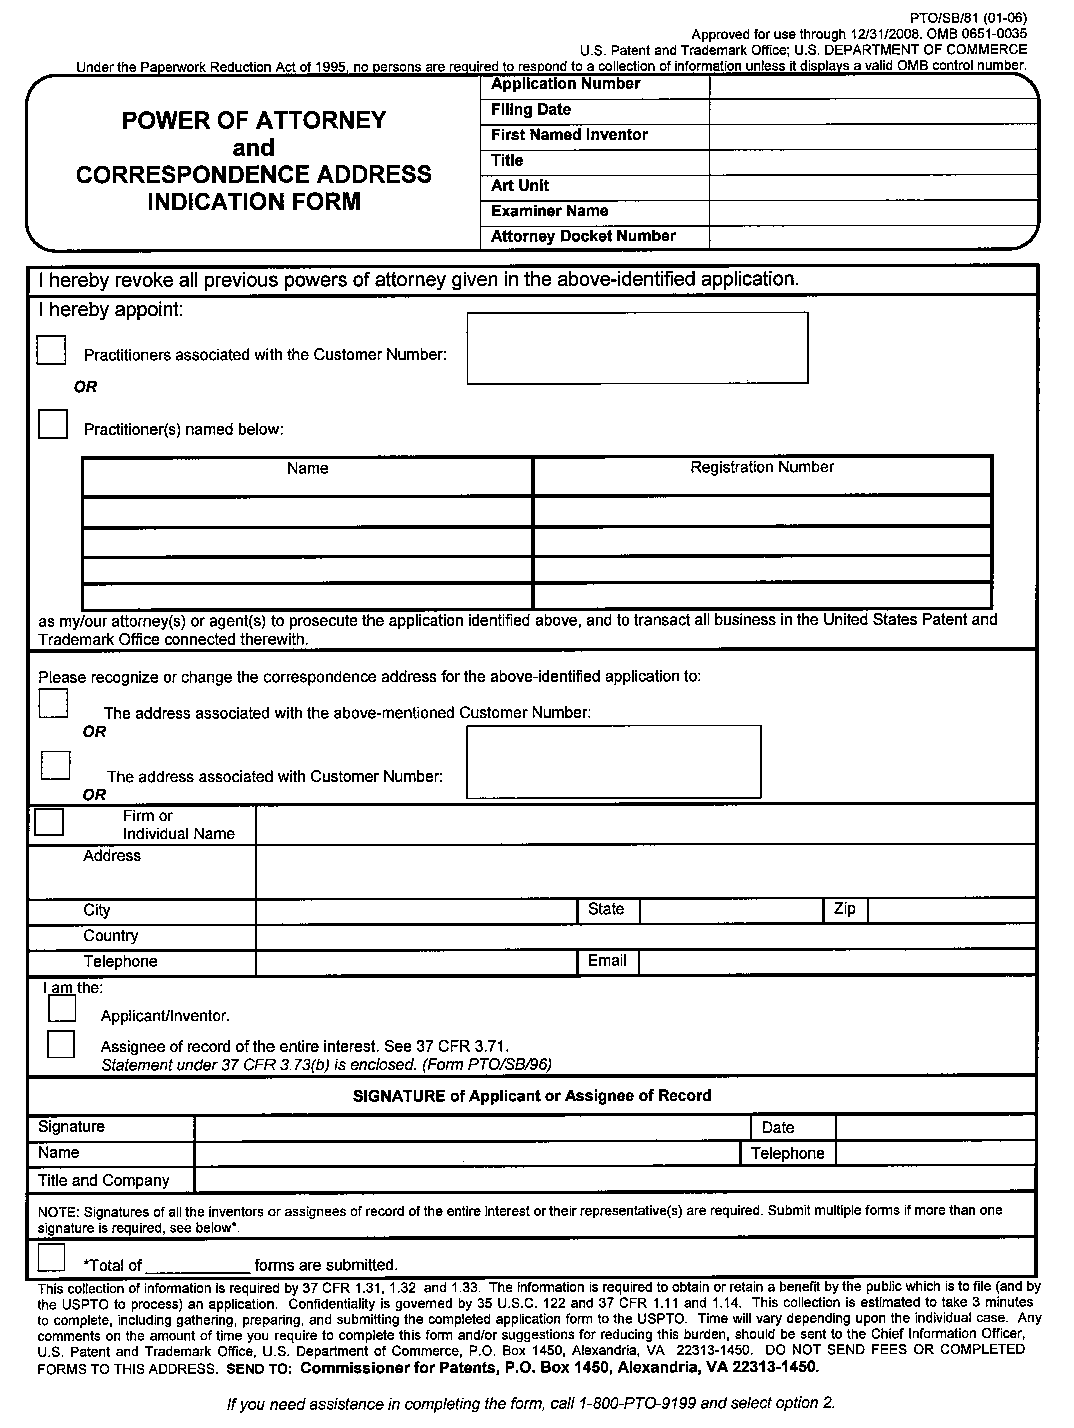 form pto/sb/81 power of attorney and correspondence address indication form